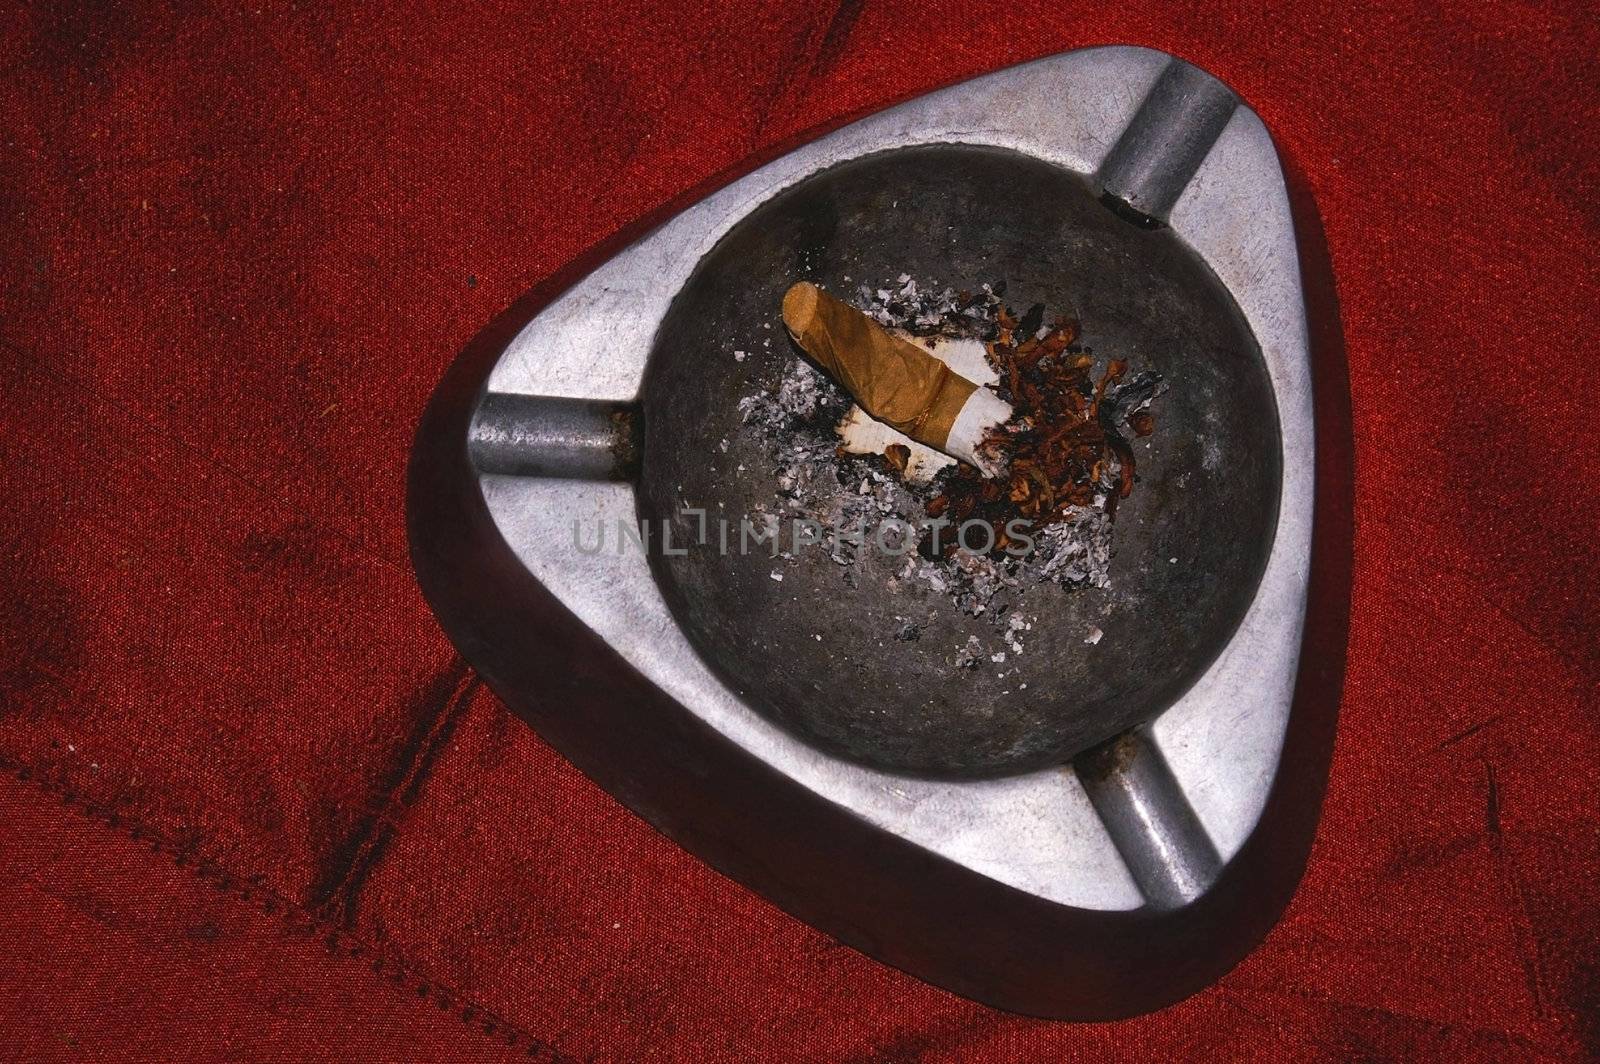 dirty metal ash tray with single stubbing sigaret in it on a red cloth   by karinclaus